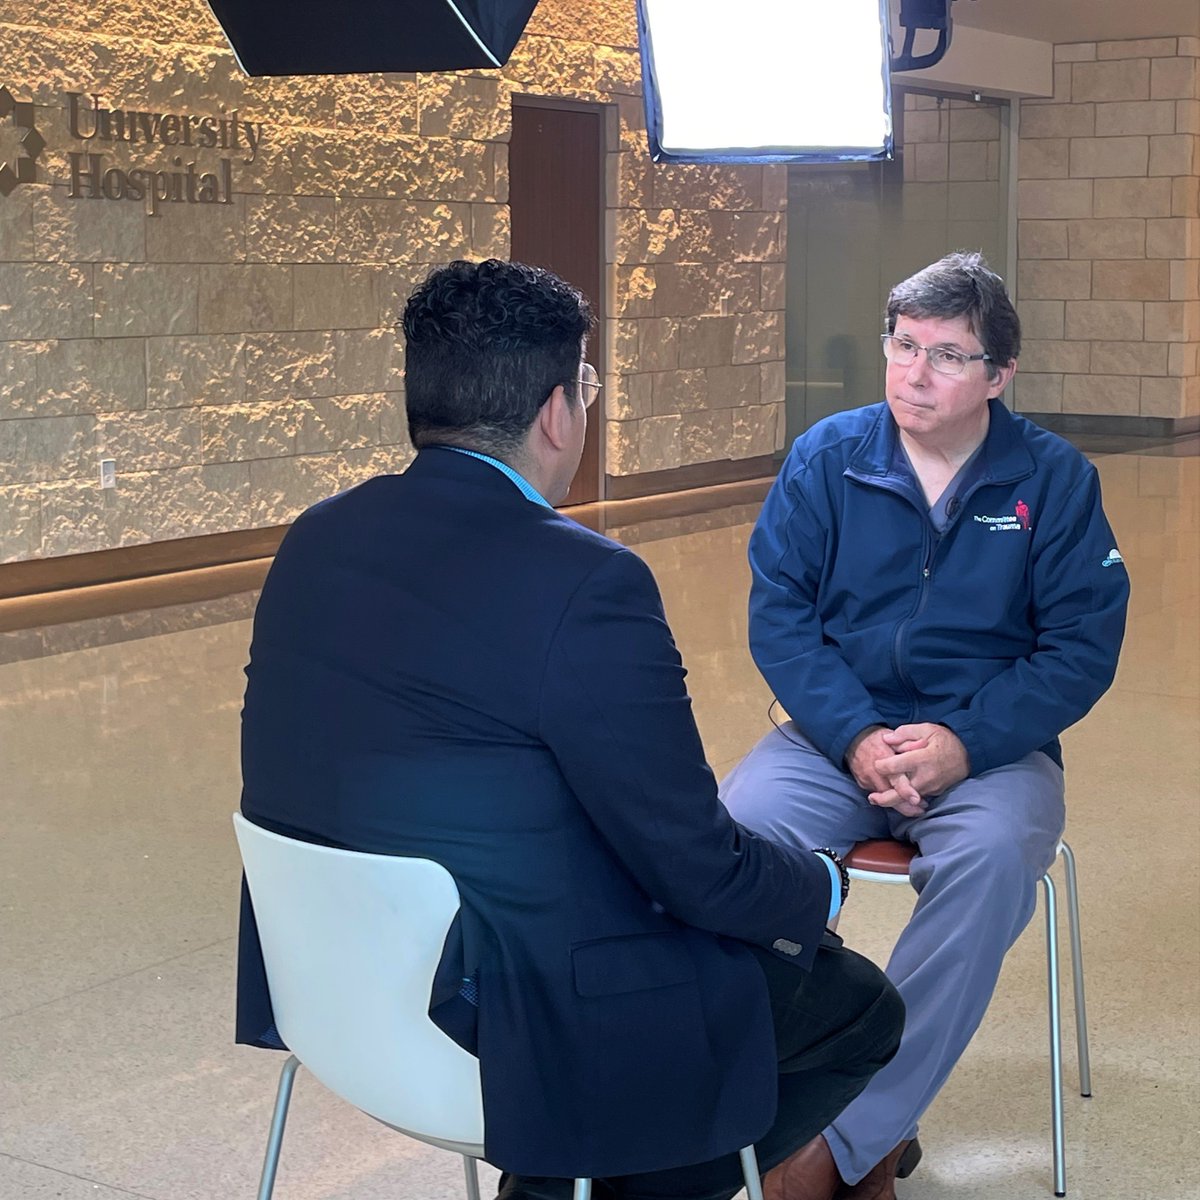 On the one-year anniversary of the Uvalde school tragedy, our trauma surgeon Dr. Ronald Stewart talks to @scrippsnews @axelturciostv. He says he hasn’t slept well since treating 4 shooting victims in our #trauma unit, but he still believes we can unite to reduce #firearminjuries.